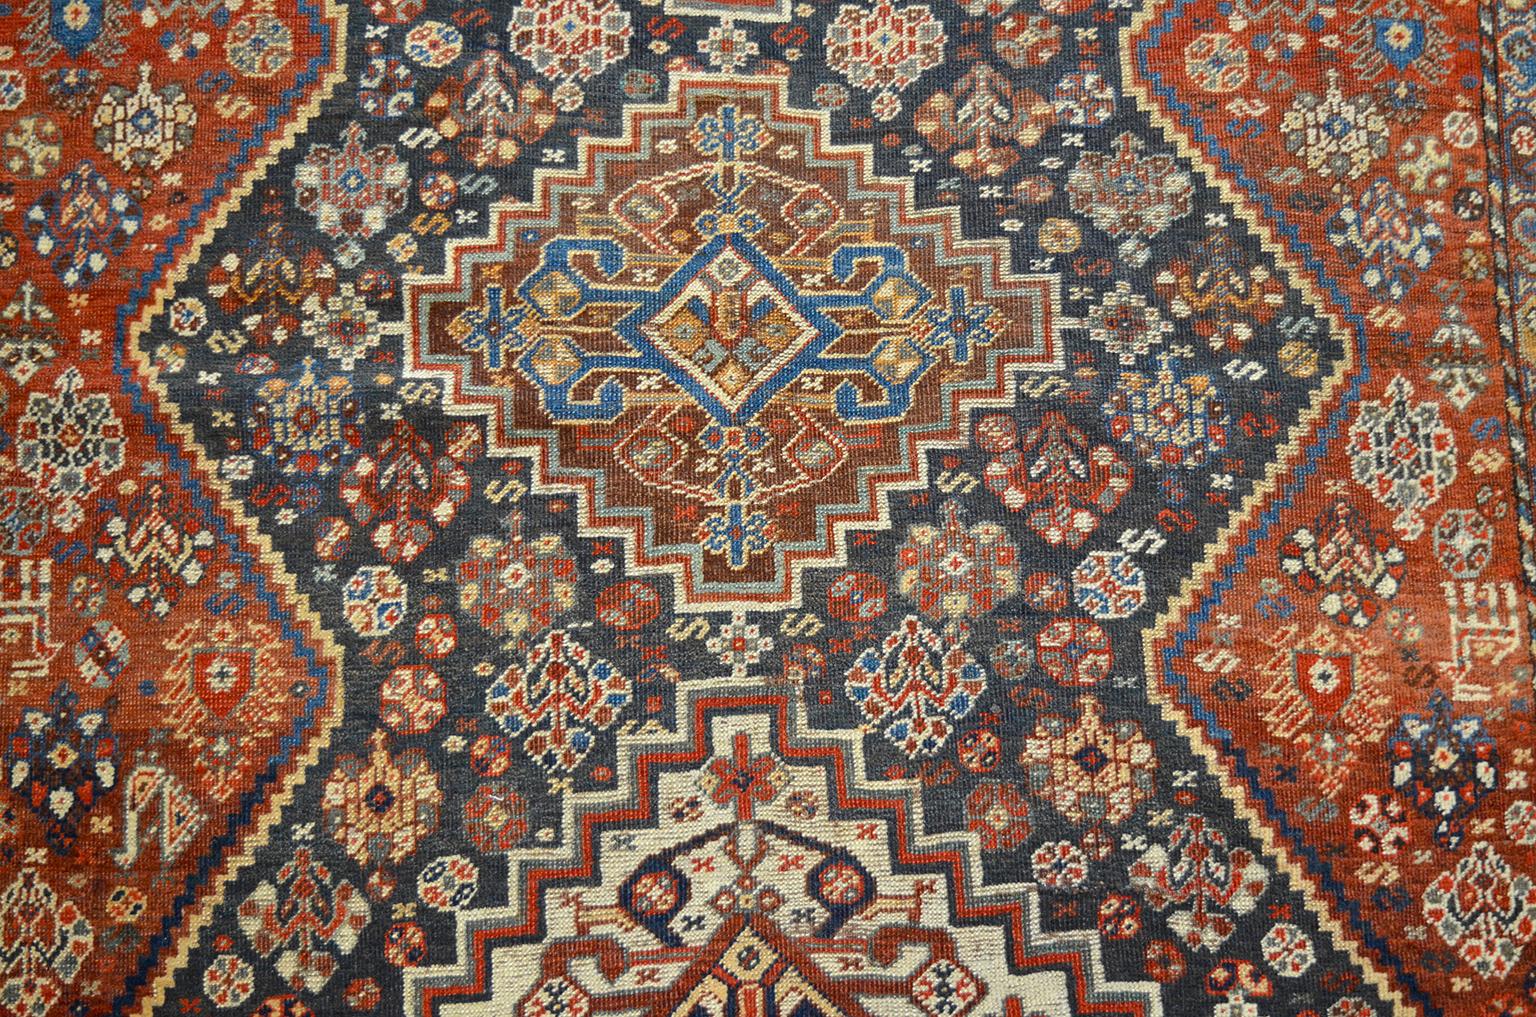 This Persian Qashqai carpet, circa 1880 consists of a pure handspun wool warp, weft and hand knotted pile and organic vegetable dyes. It demonstrates the Classic playful geometric style of these Qashqai pieces utilizing a pleasing overall layout and